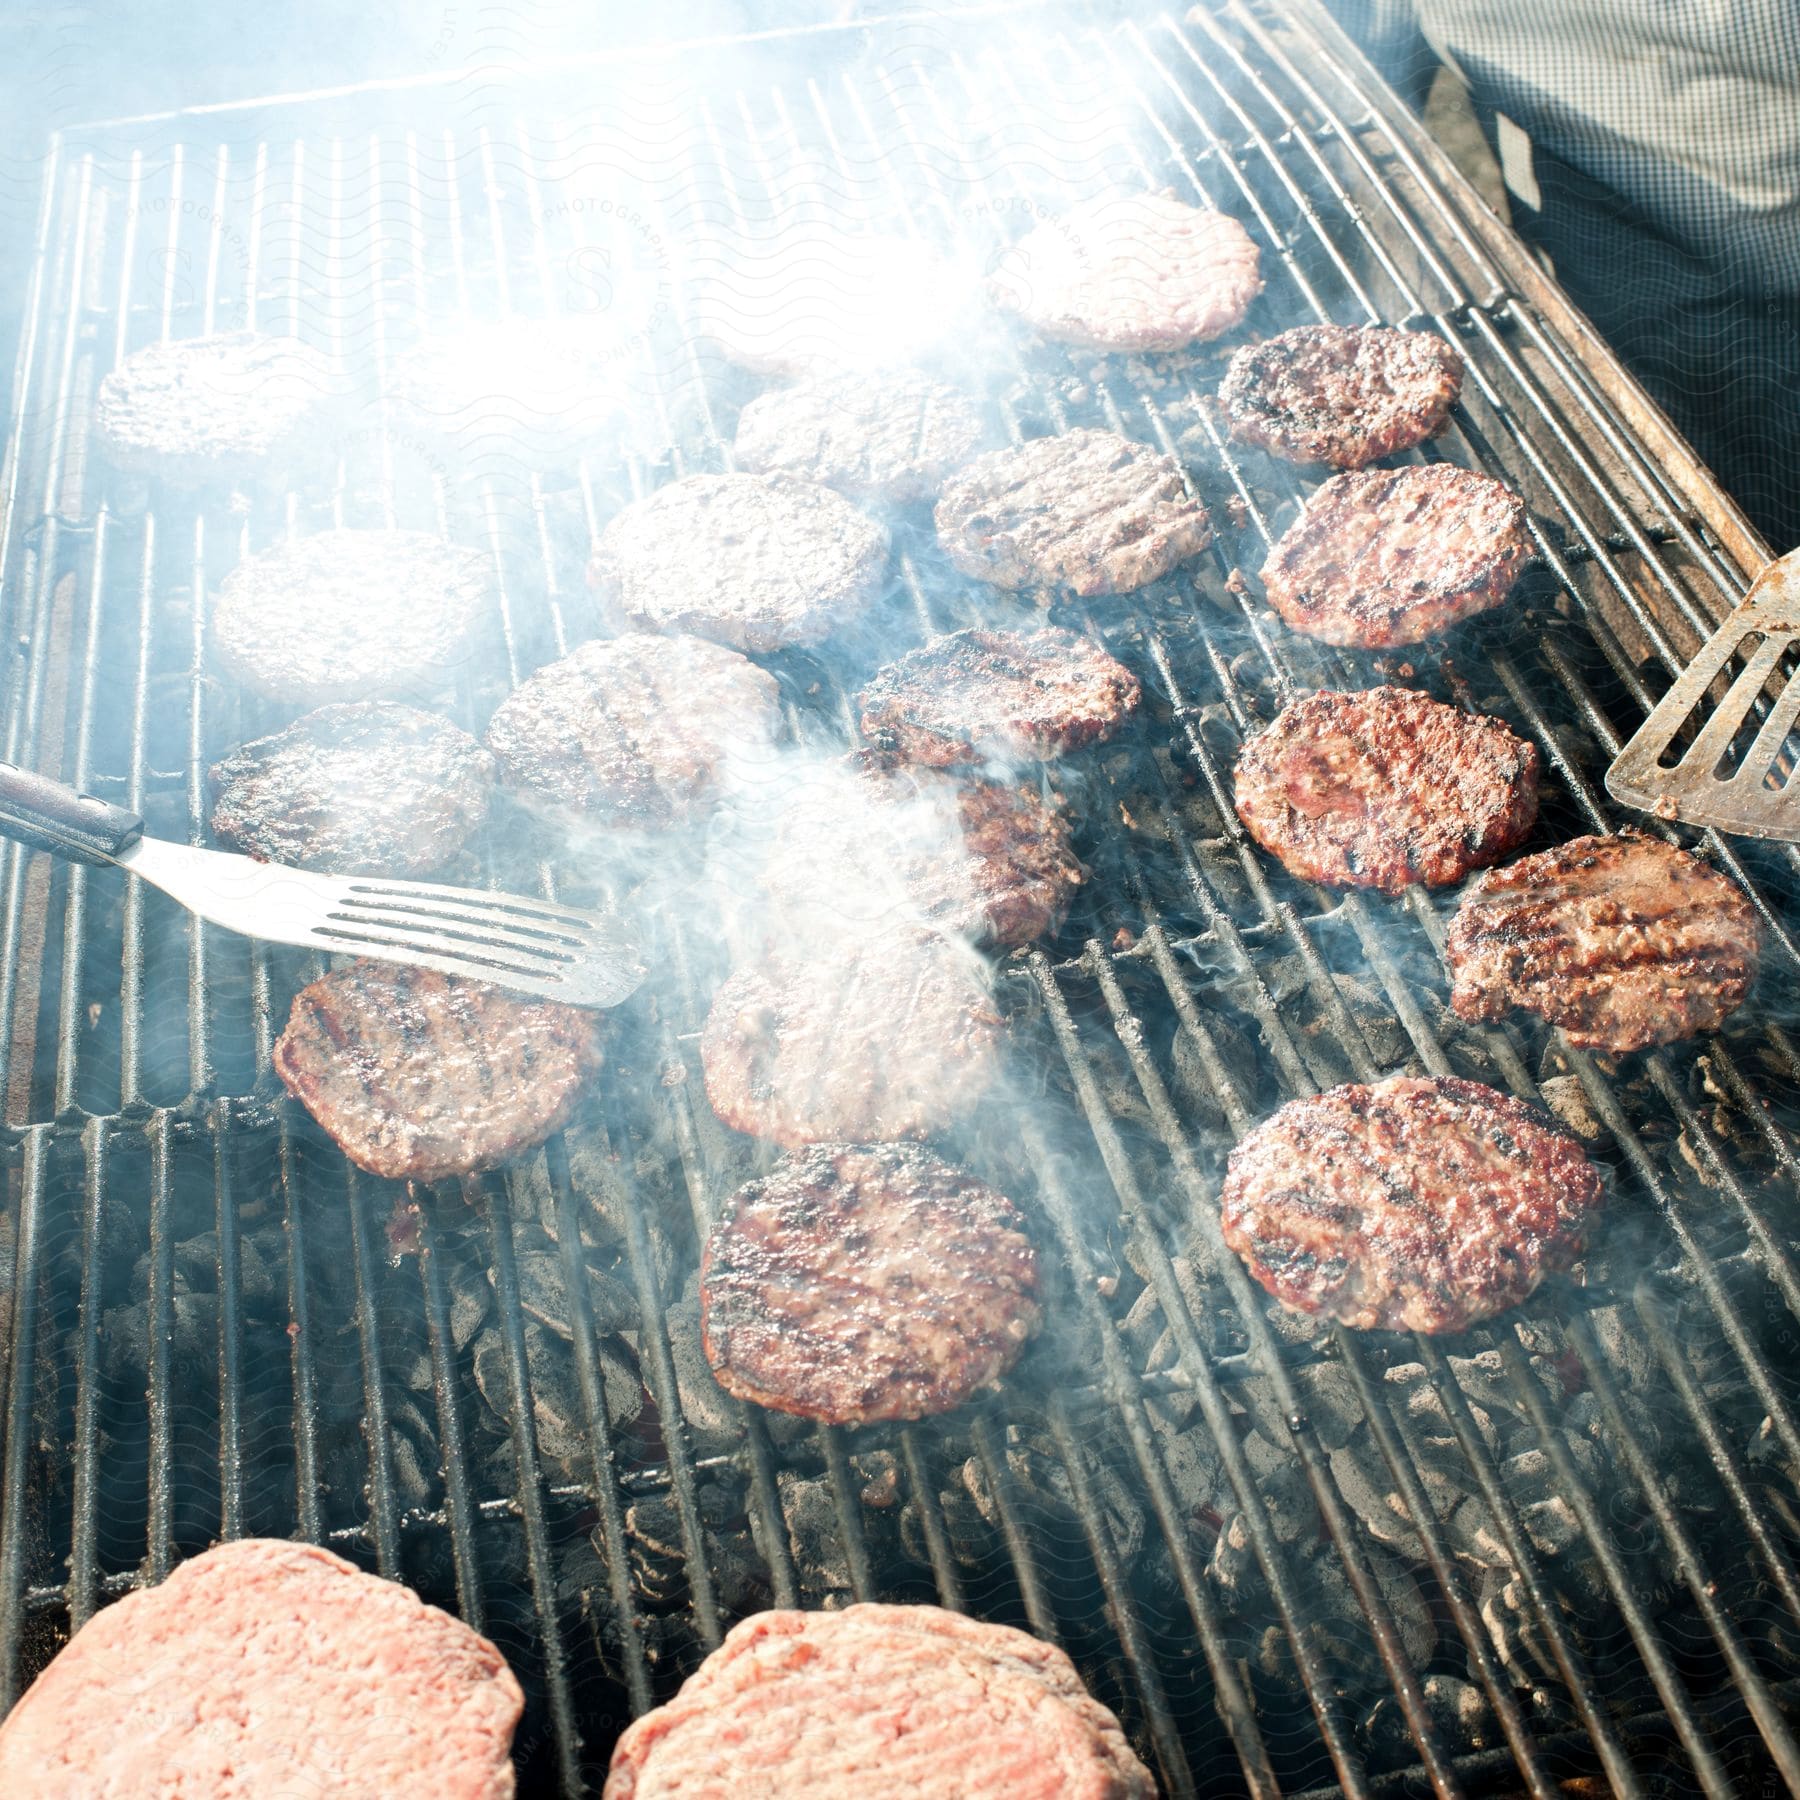 A man is cooking burgers on a griddle